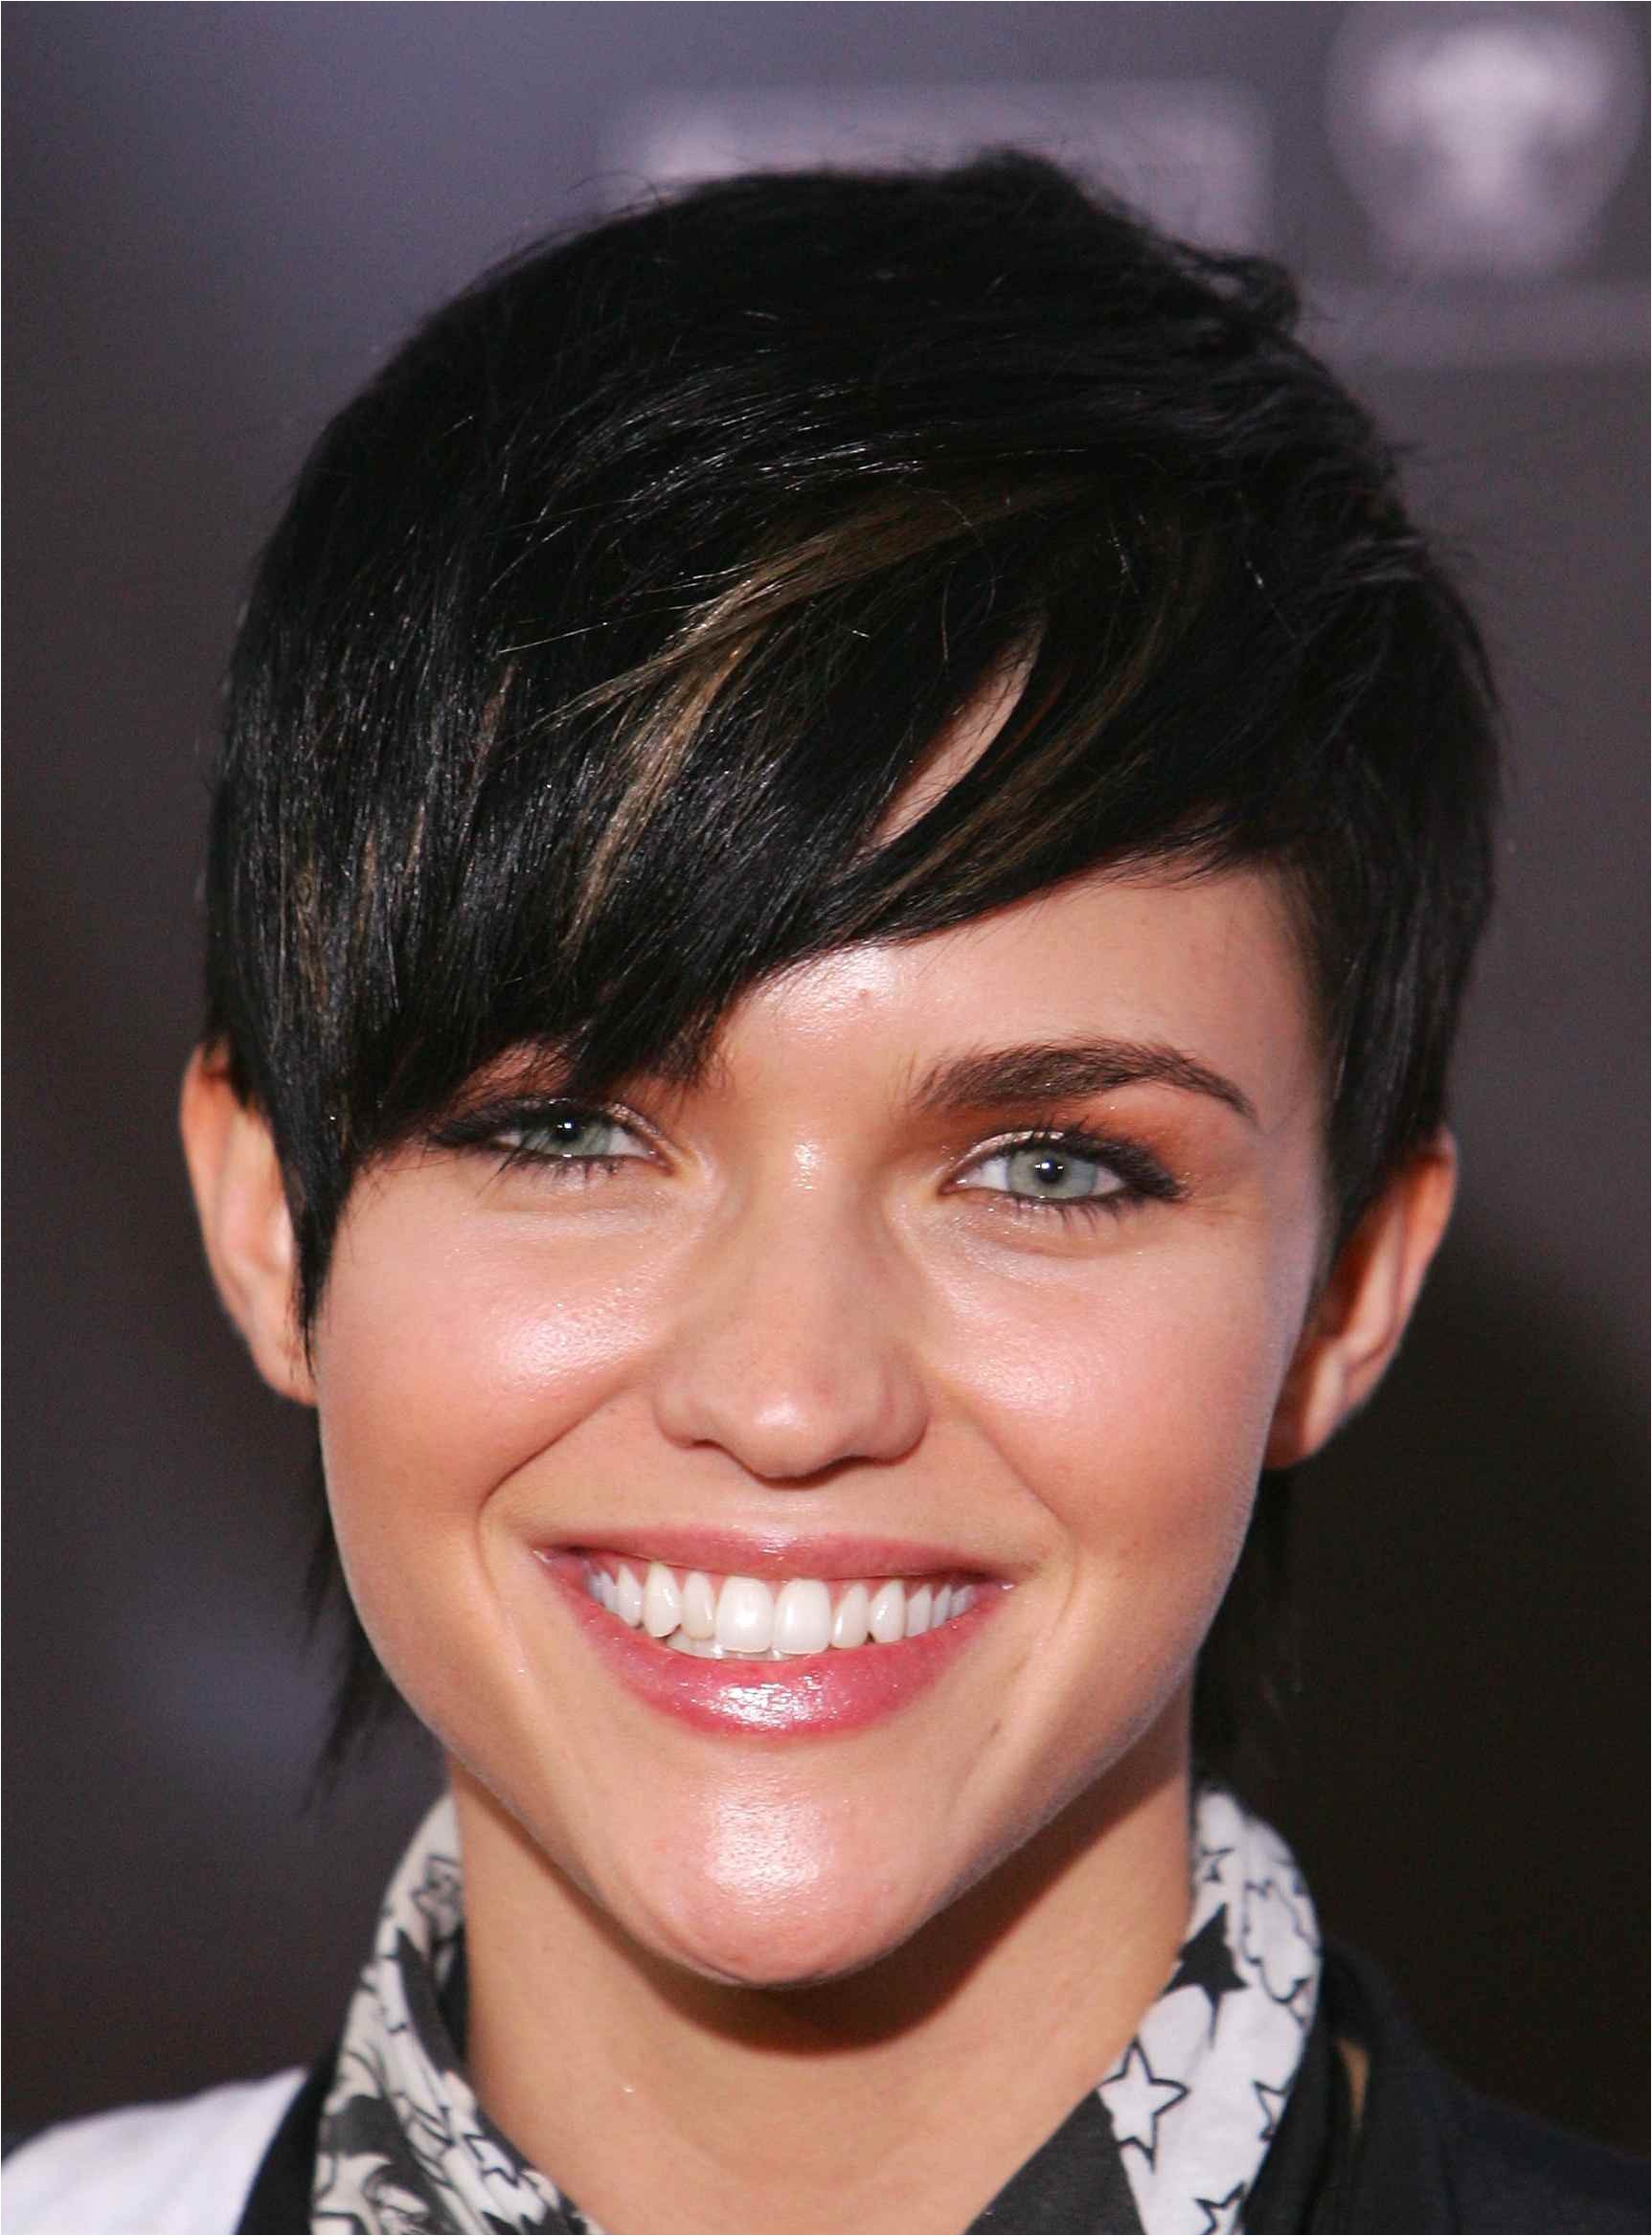 Hairstyles for Girls with Big Ears the Best Hairstyles for Women Of Every Body Type